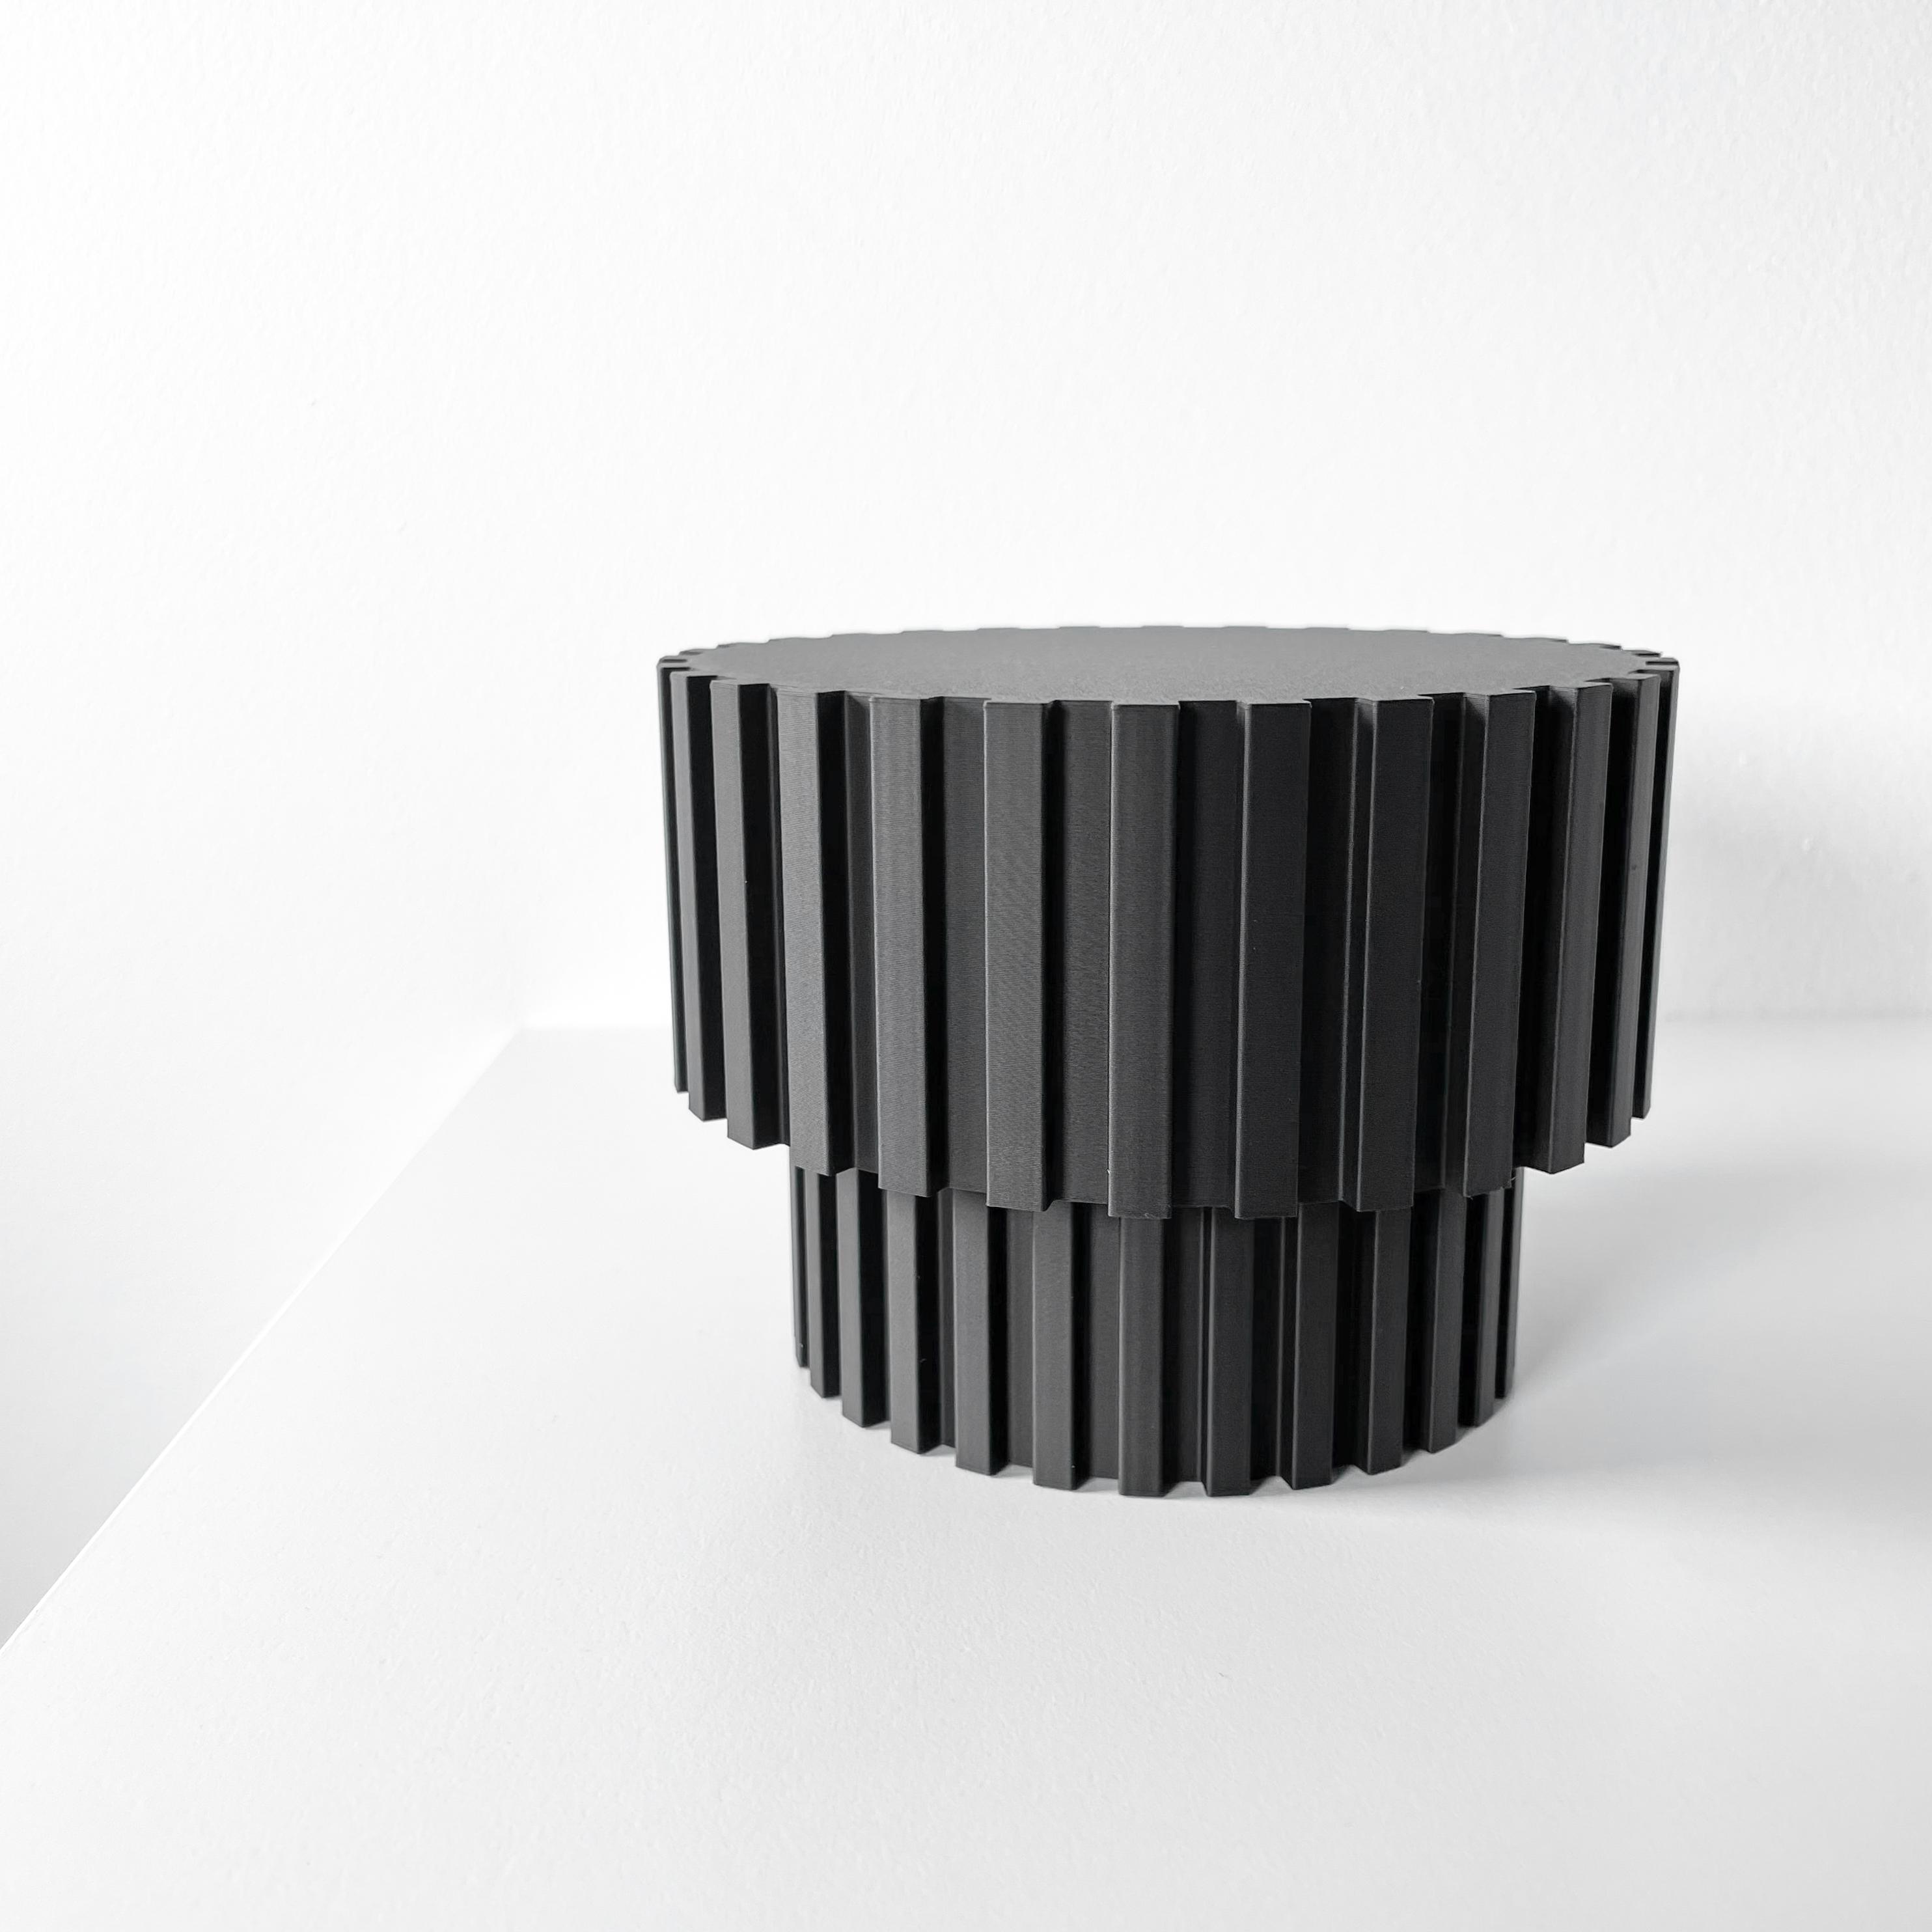 The Vorn Display Stand for Planters and Decor | Modern and Unique Home Decor 3d model